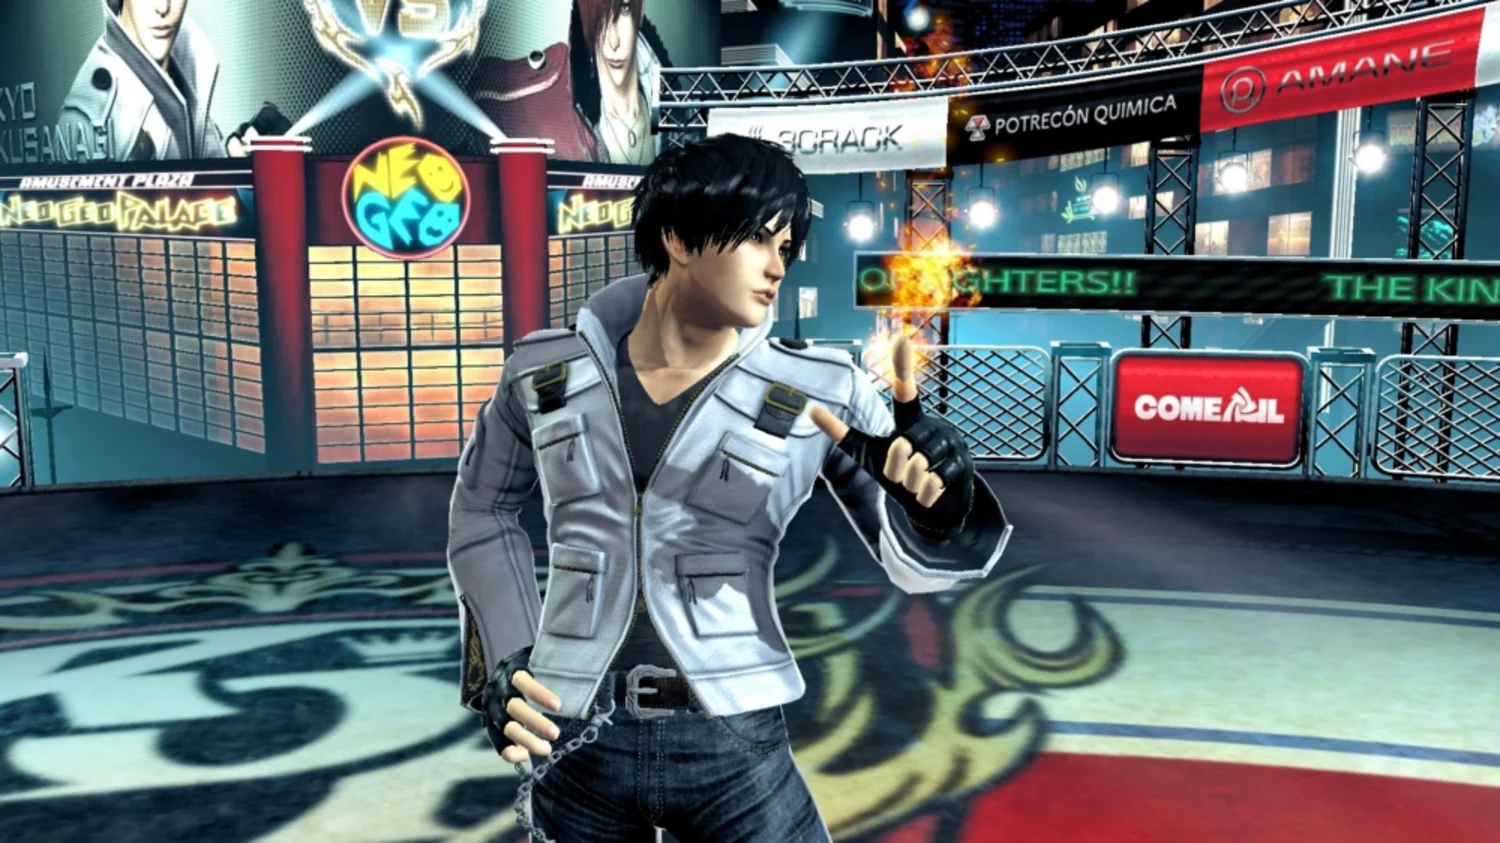 Jogo The King of Fighters XIV - PS4 - Playstation 4 - Jogos PS4 Curitiba -  Playstation 4 Curitiba - Play 4 - Loja de Games Curitiba - Brasil Games -  Console